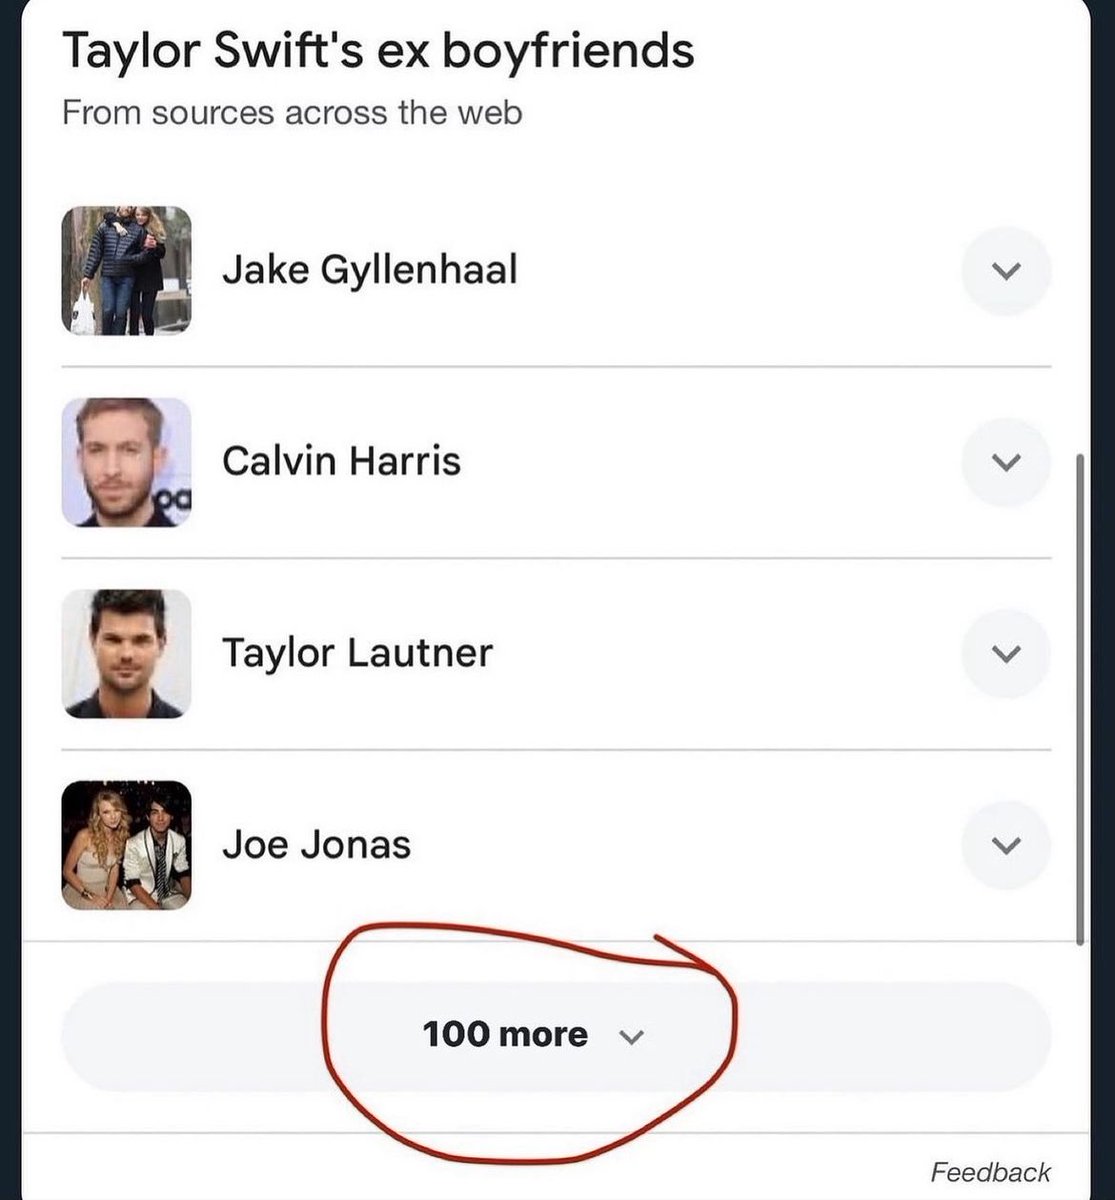 Taylor Swift body count is INSANE 😭